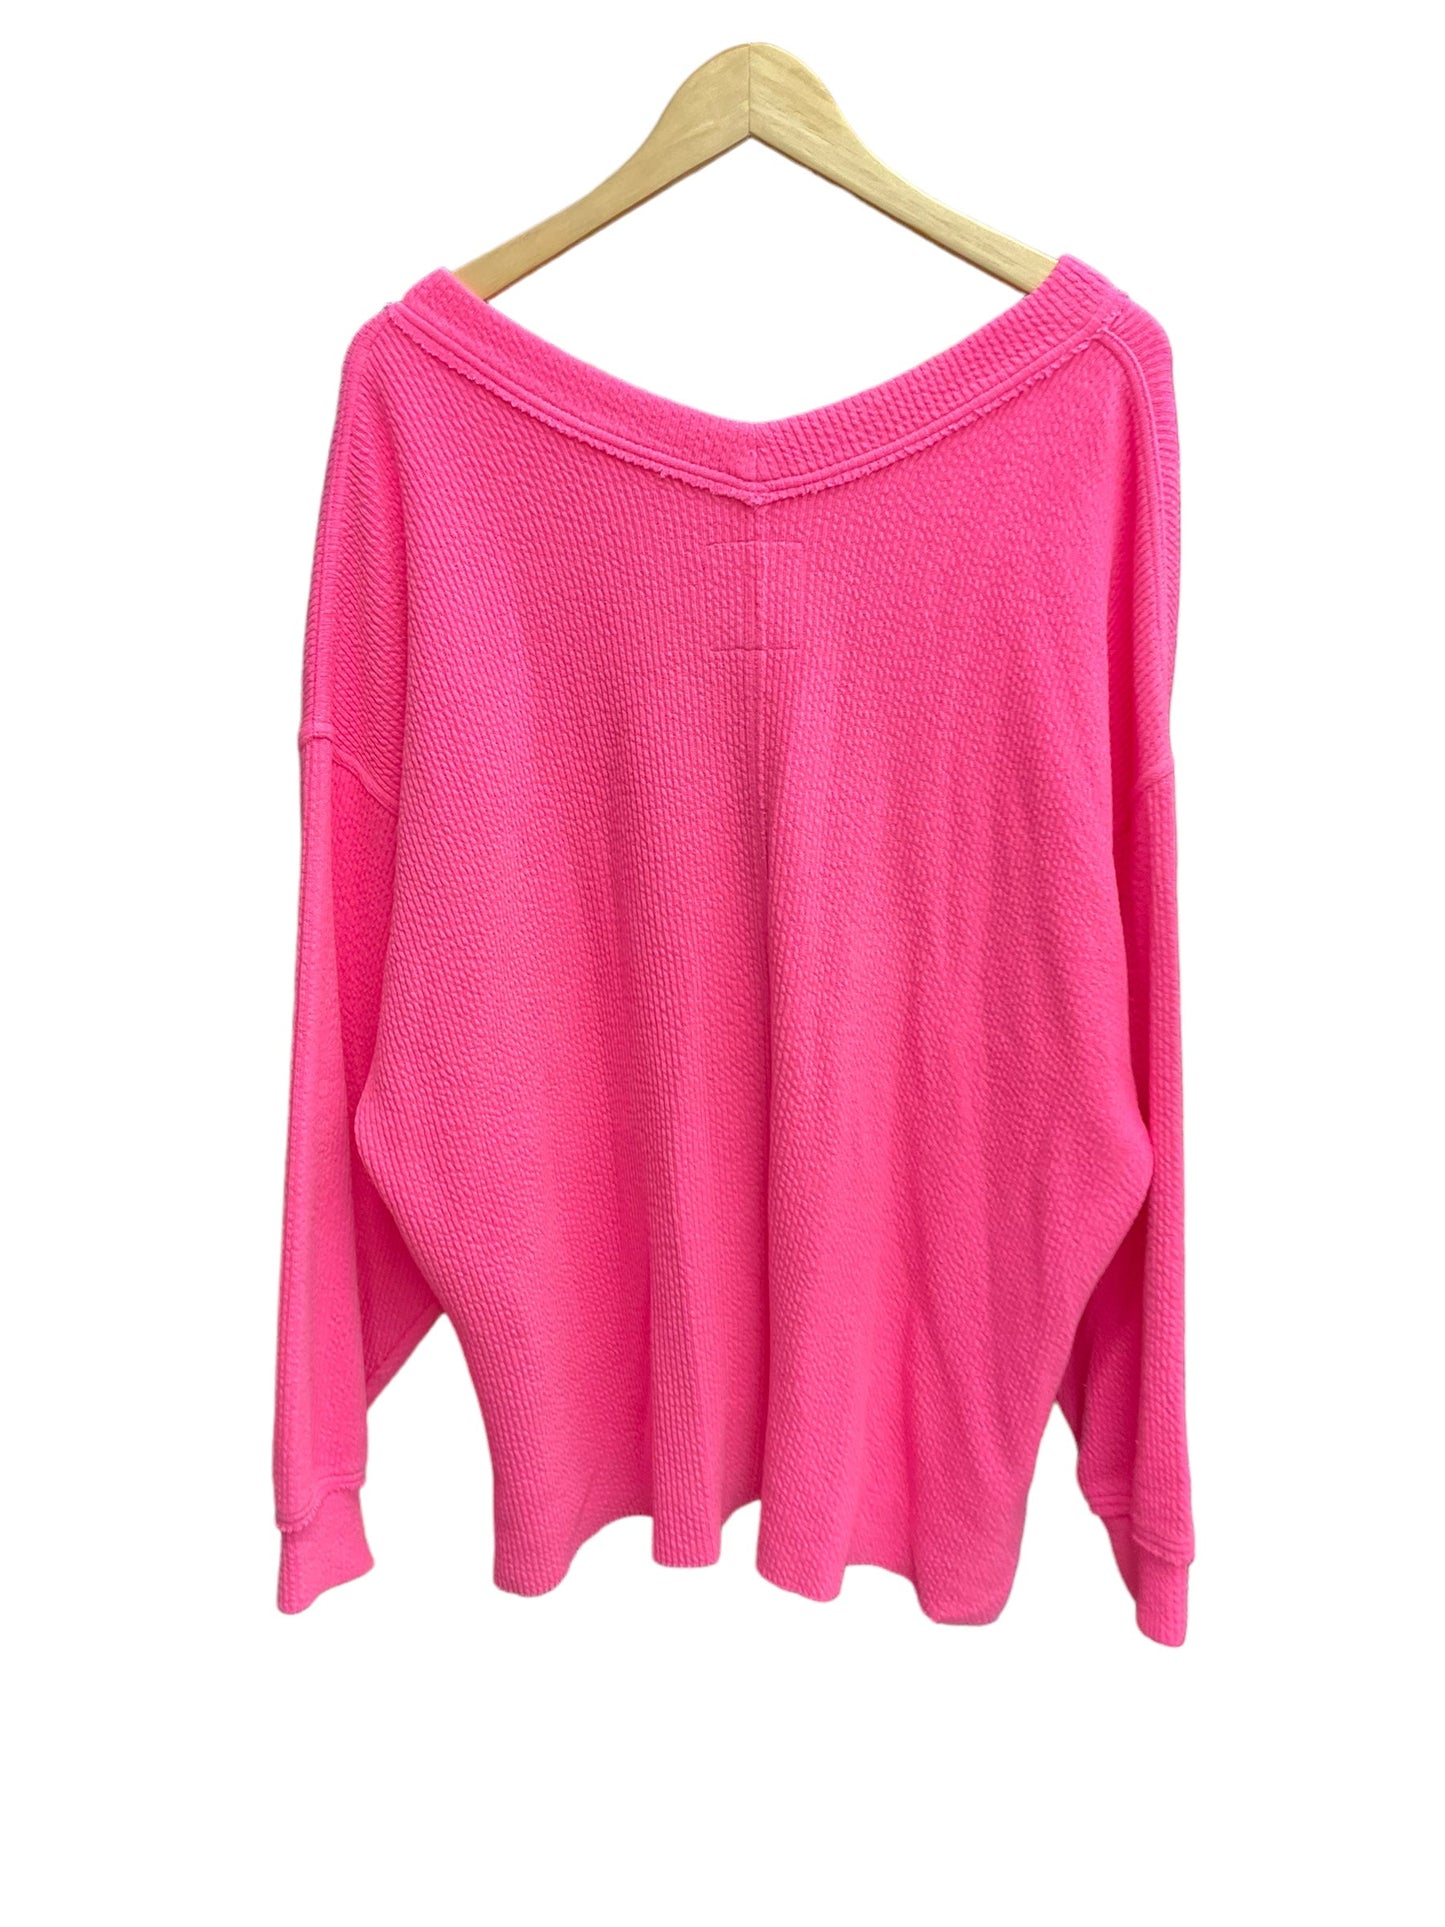 Pink Top Long Sleeve Aerie, Size Xl